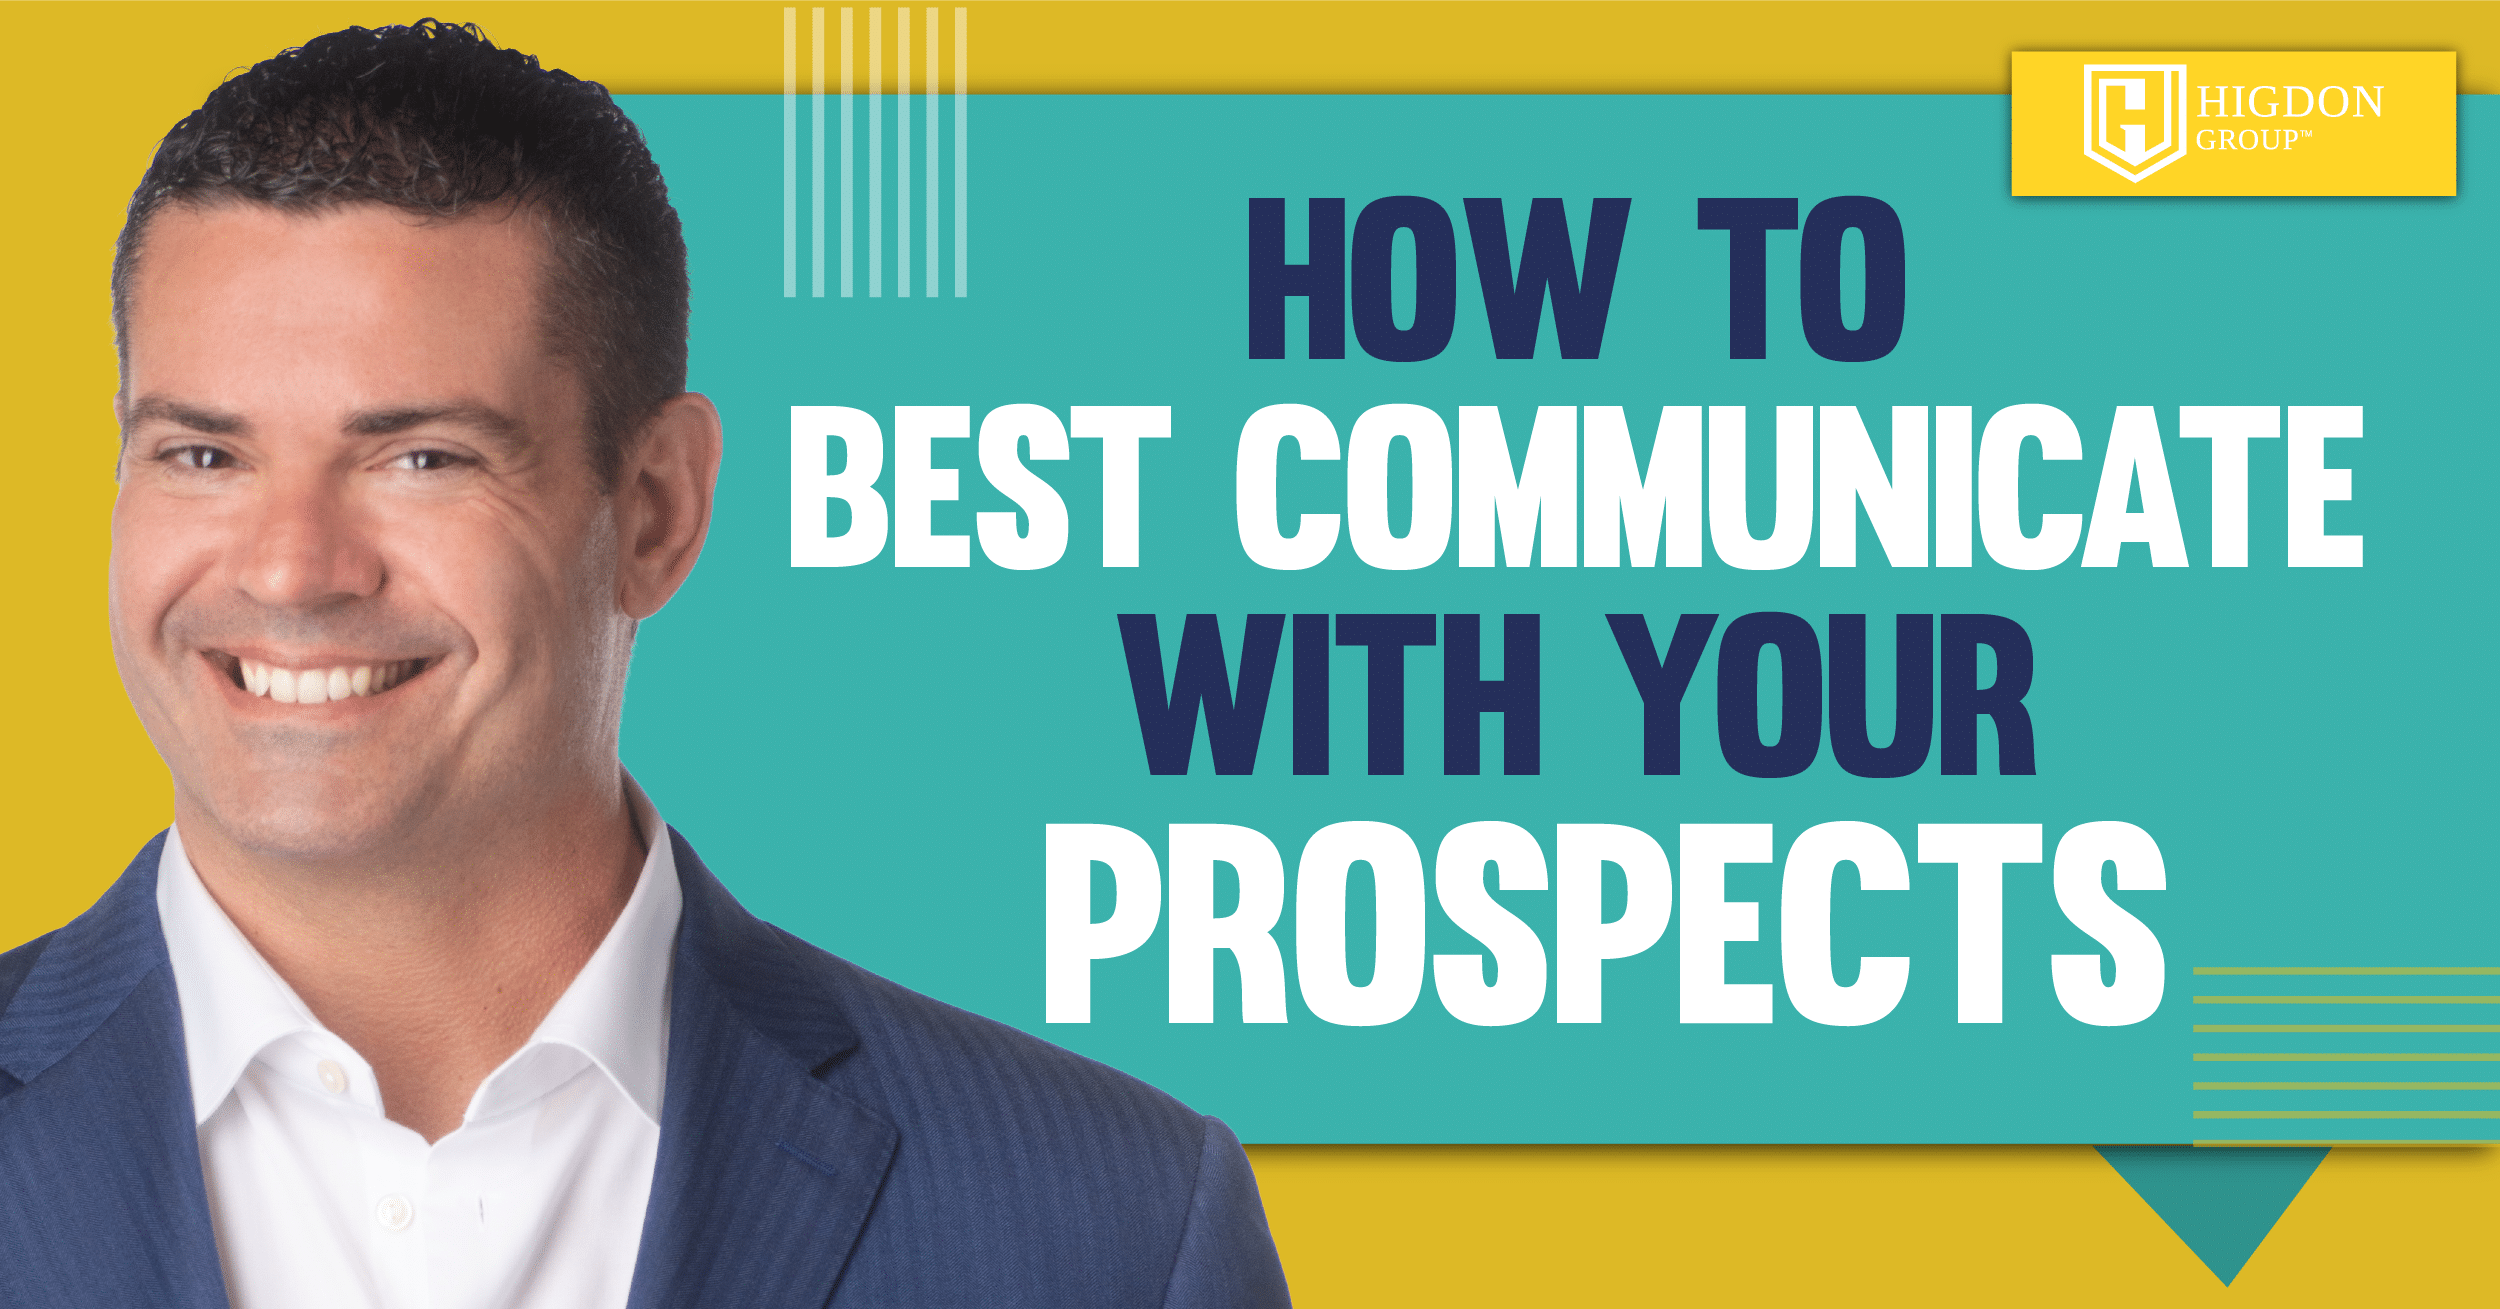 How to Best Communicate with Your Prospects